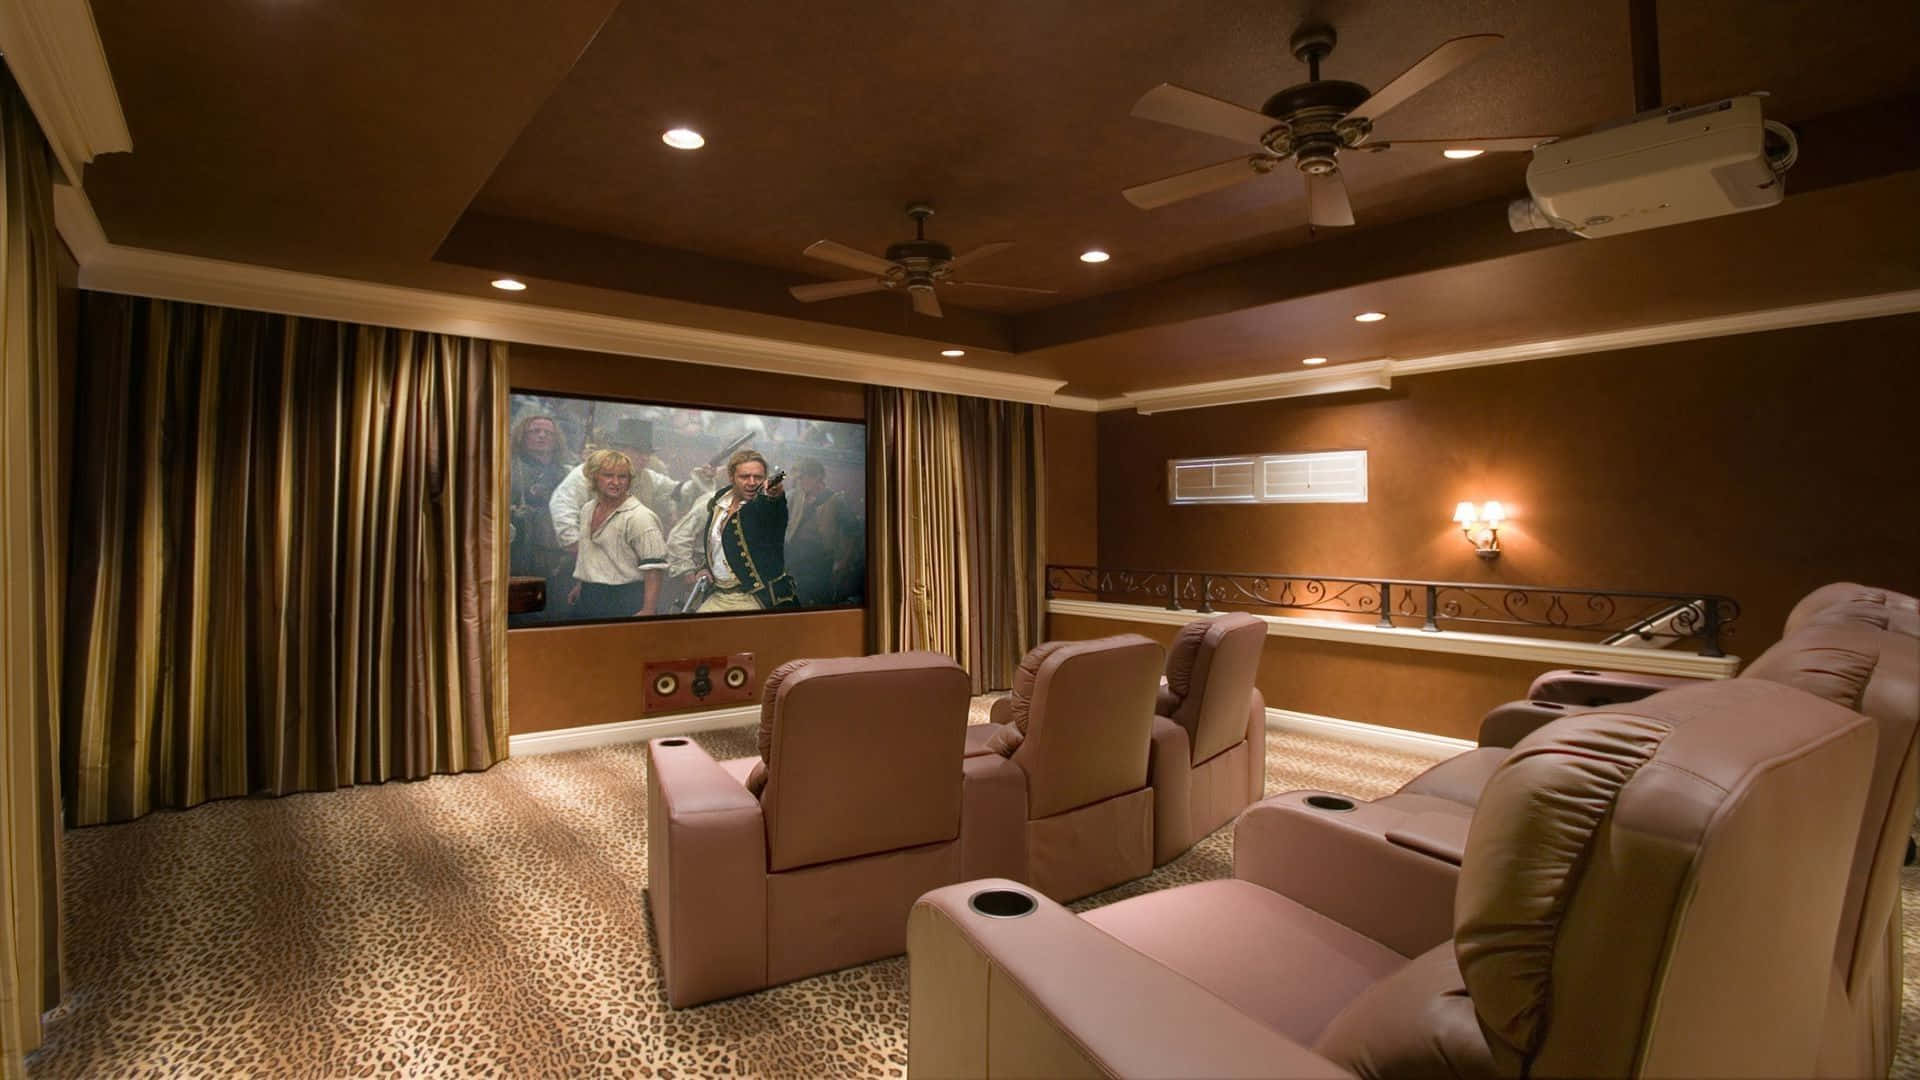 Upgrade your home viewing experience with a personalized Home Cinema Wallpaper